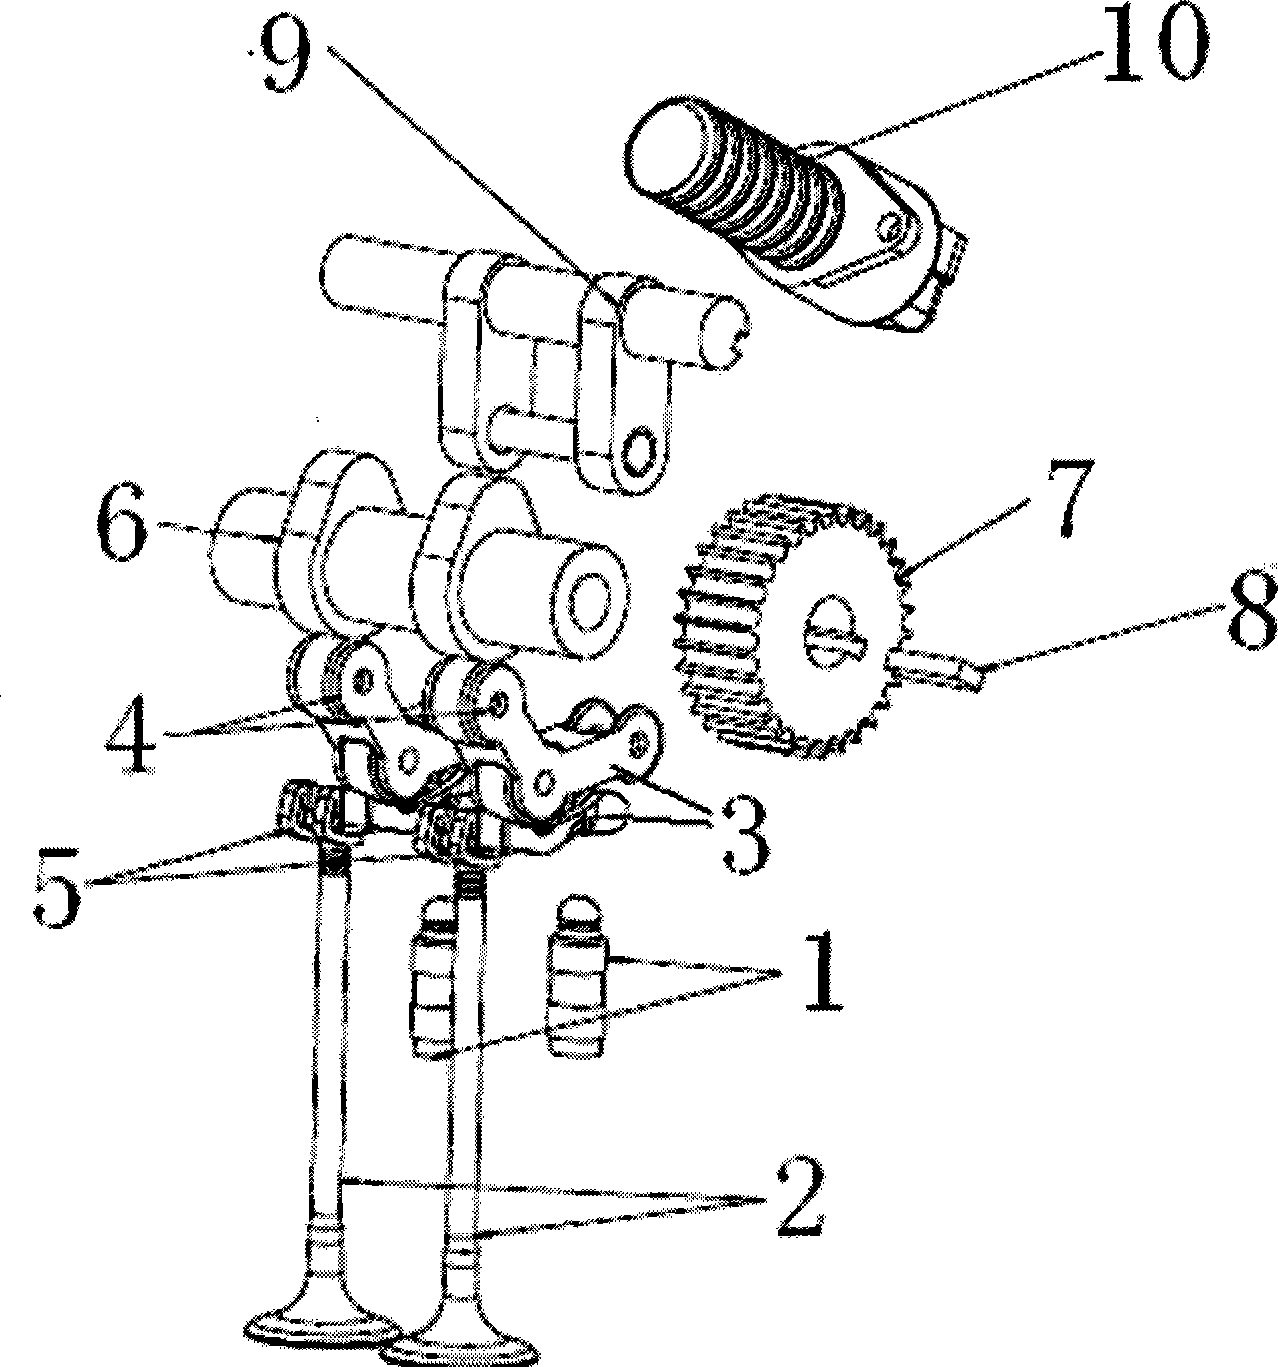 Novel air distribution system with variable lift